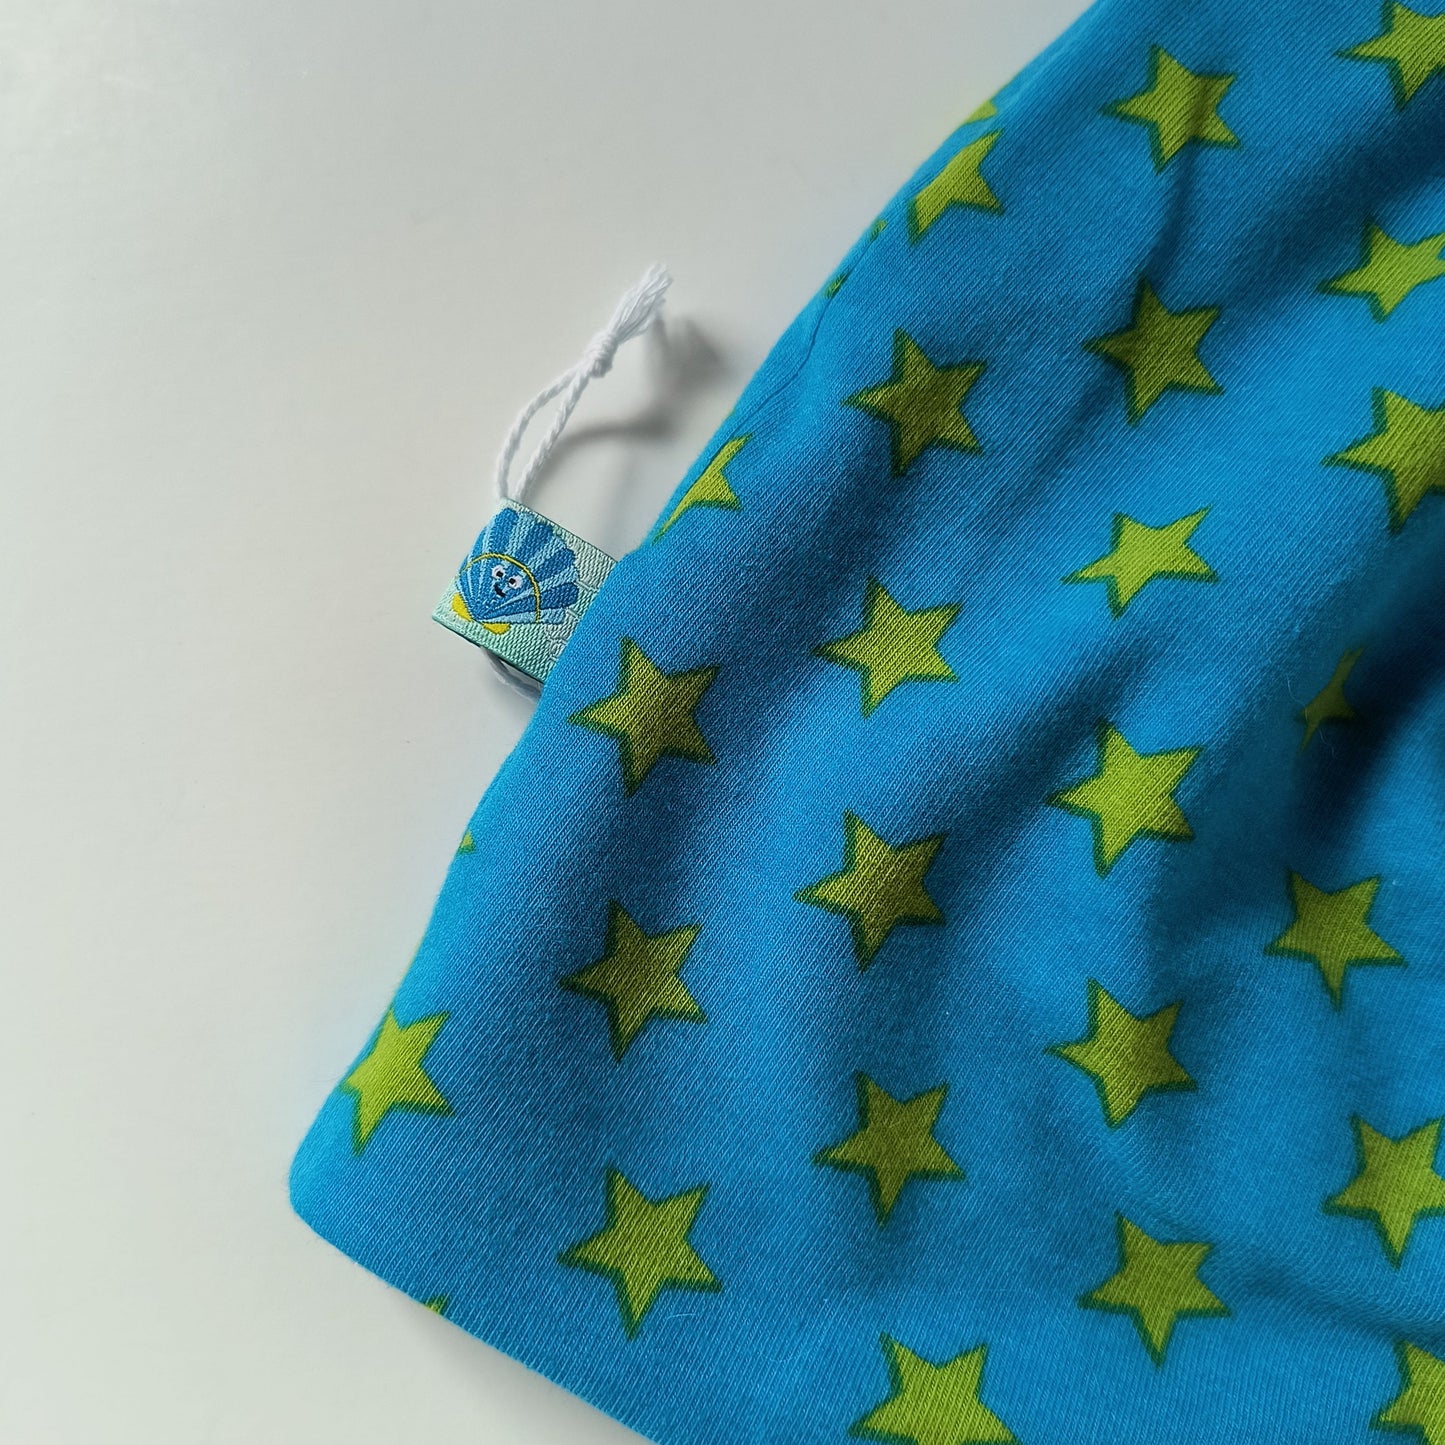 Baby or toddler beanie hat, turquoise stars, size EUR 50 cm head circumference/US 1-2 years (Handmade in Canada)